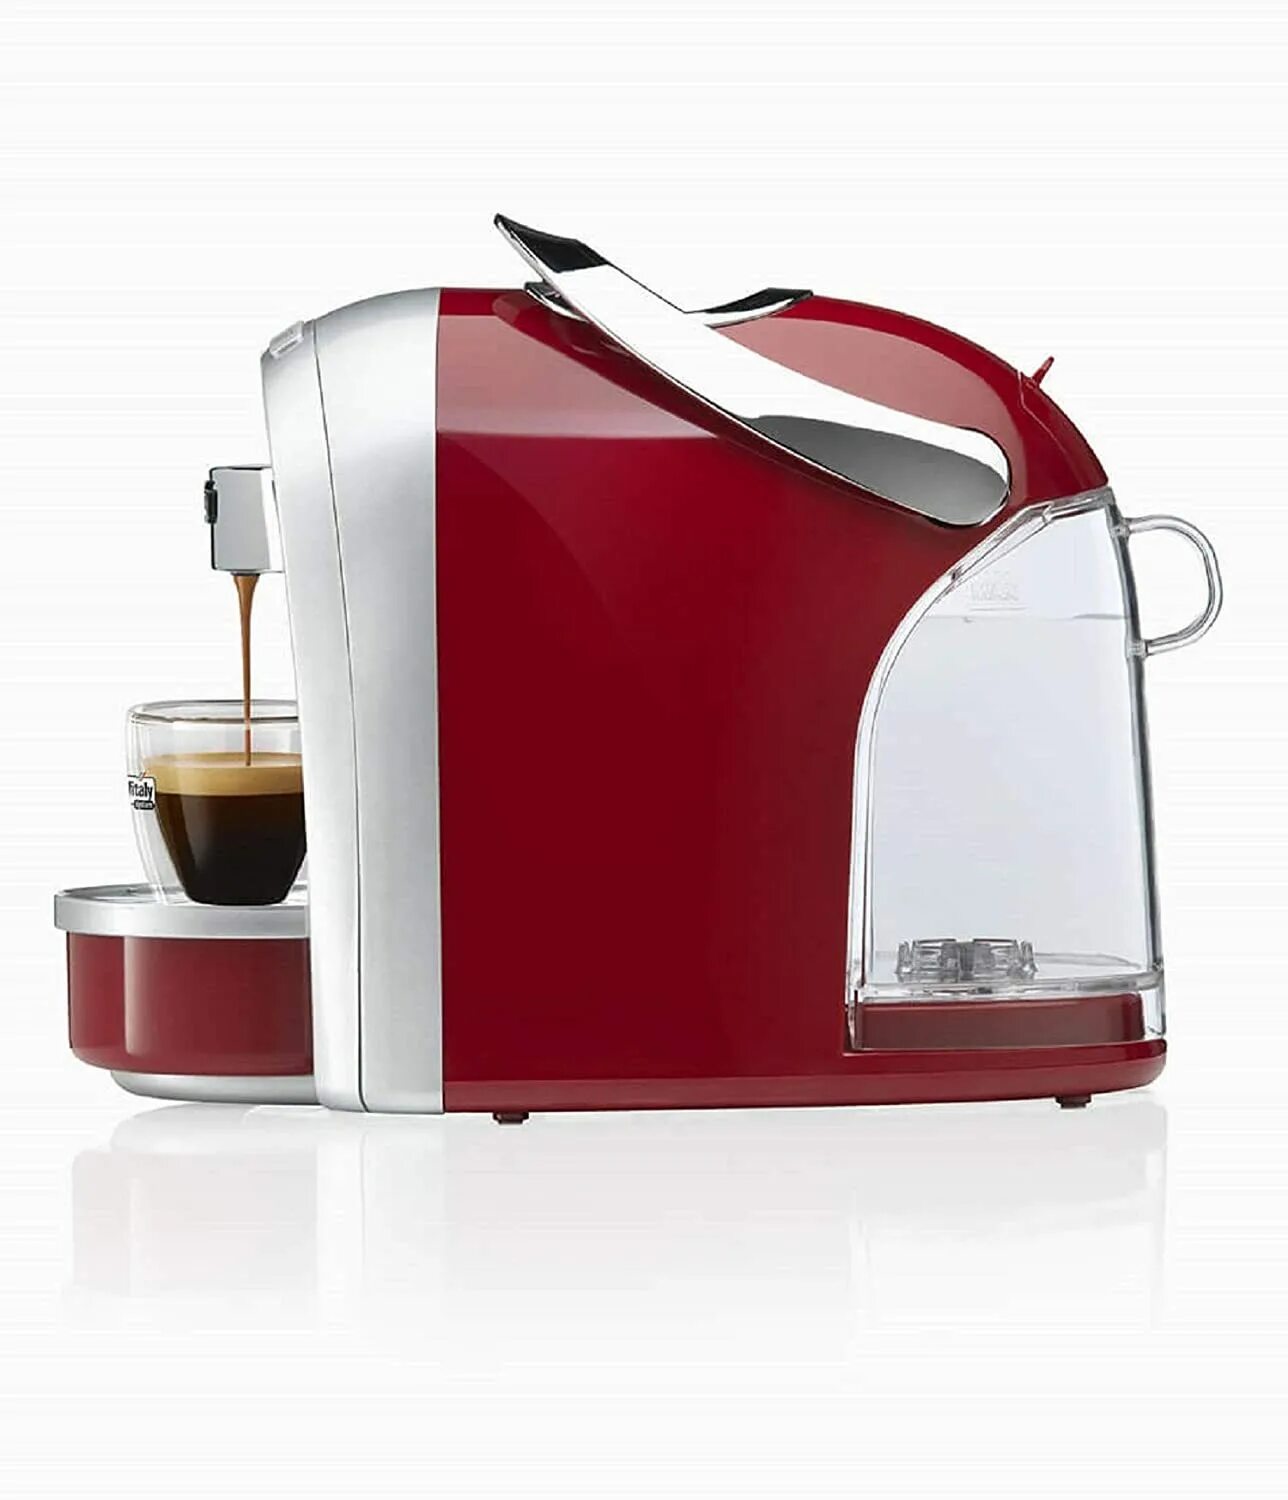 Caffitaly system. Кофемашина Caffitaly s16. Кофемашина Caffitaly System Diadema. Caffitaly кофемашина капсульная. Капсульная кофемашина Caffitaly System.